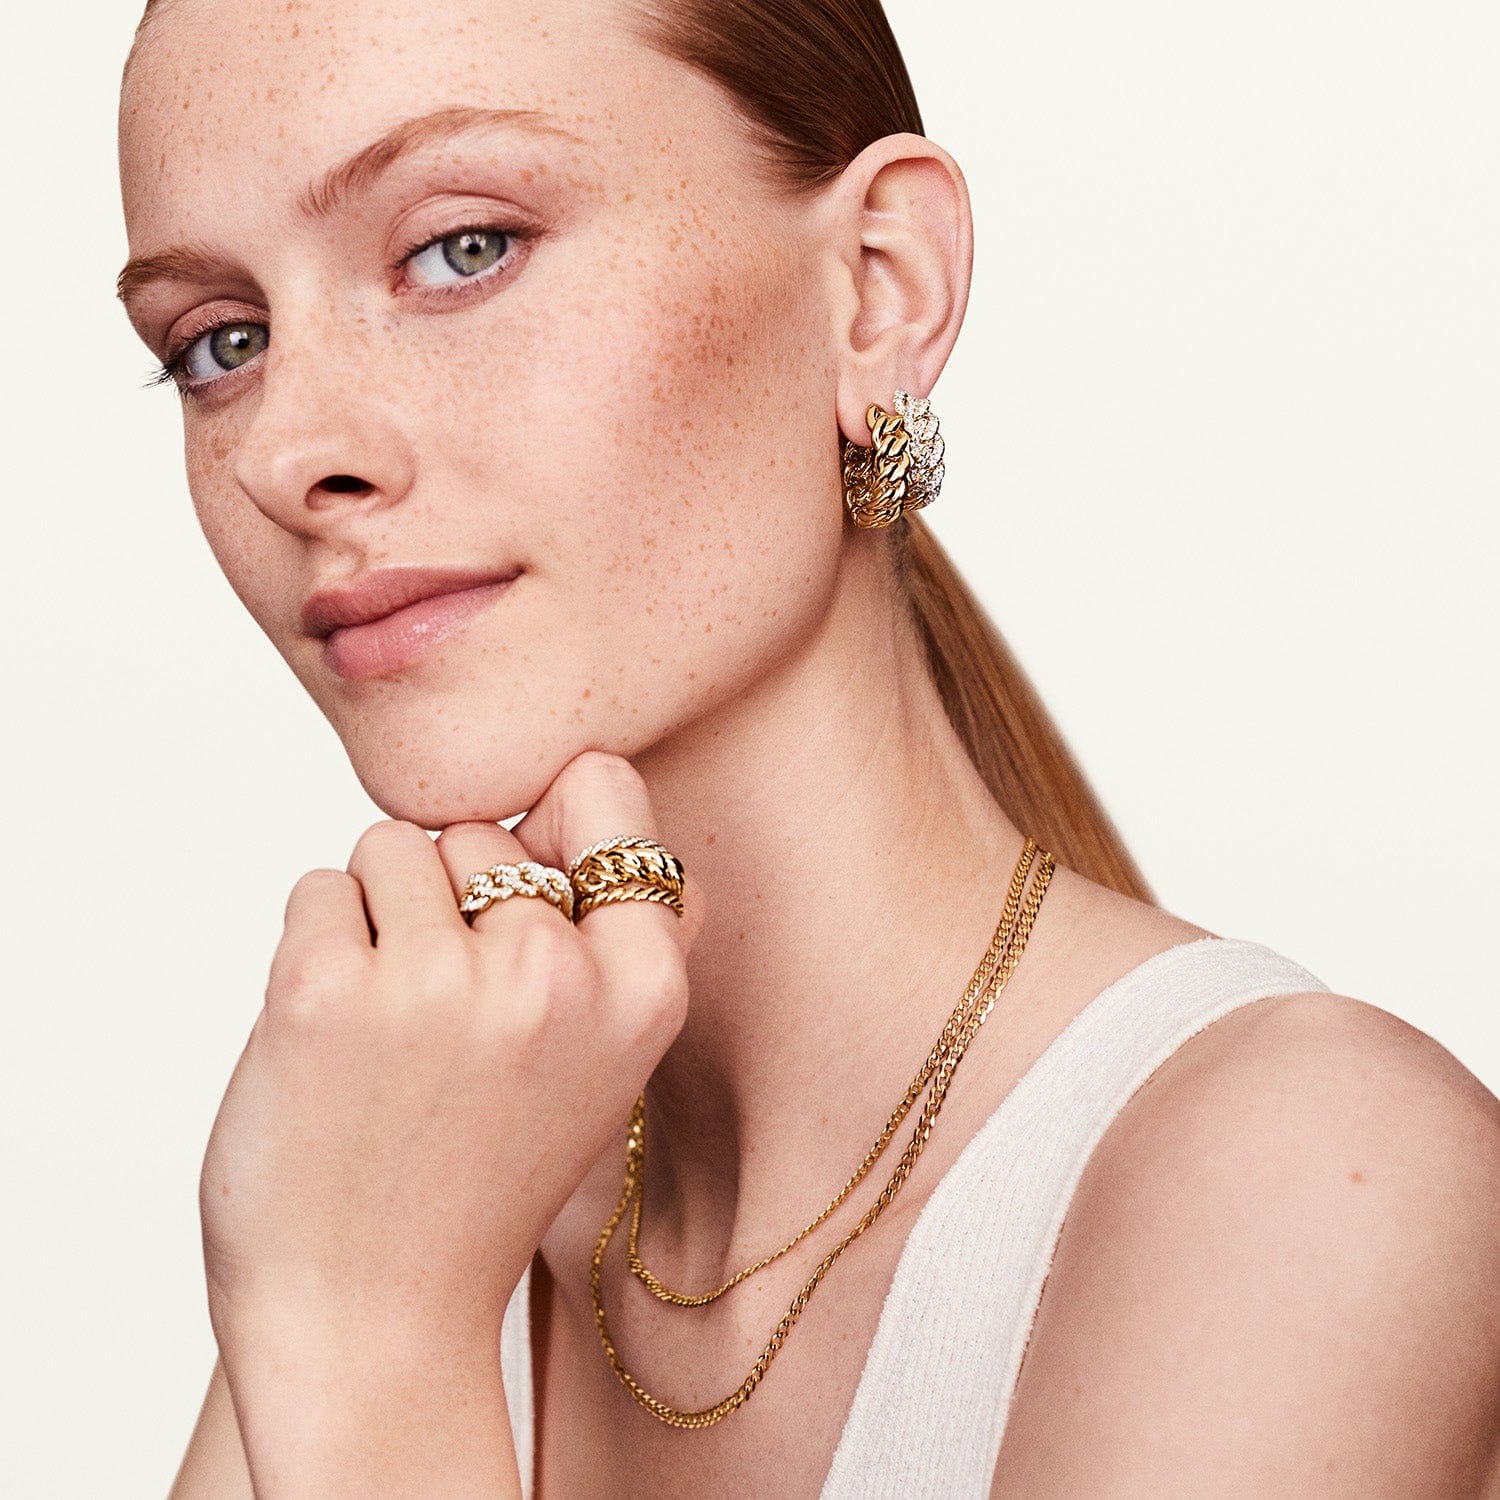 A woman posing with a 14k yellow gold pave infinity ring, complemented by matching earrings and necklaces.